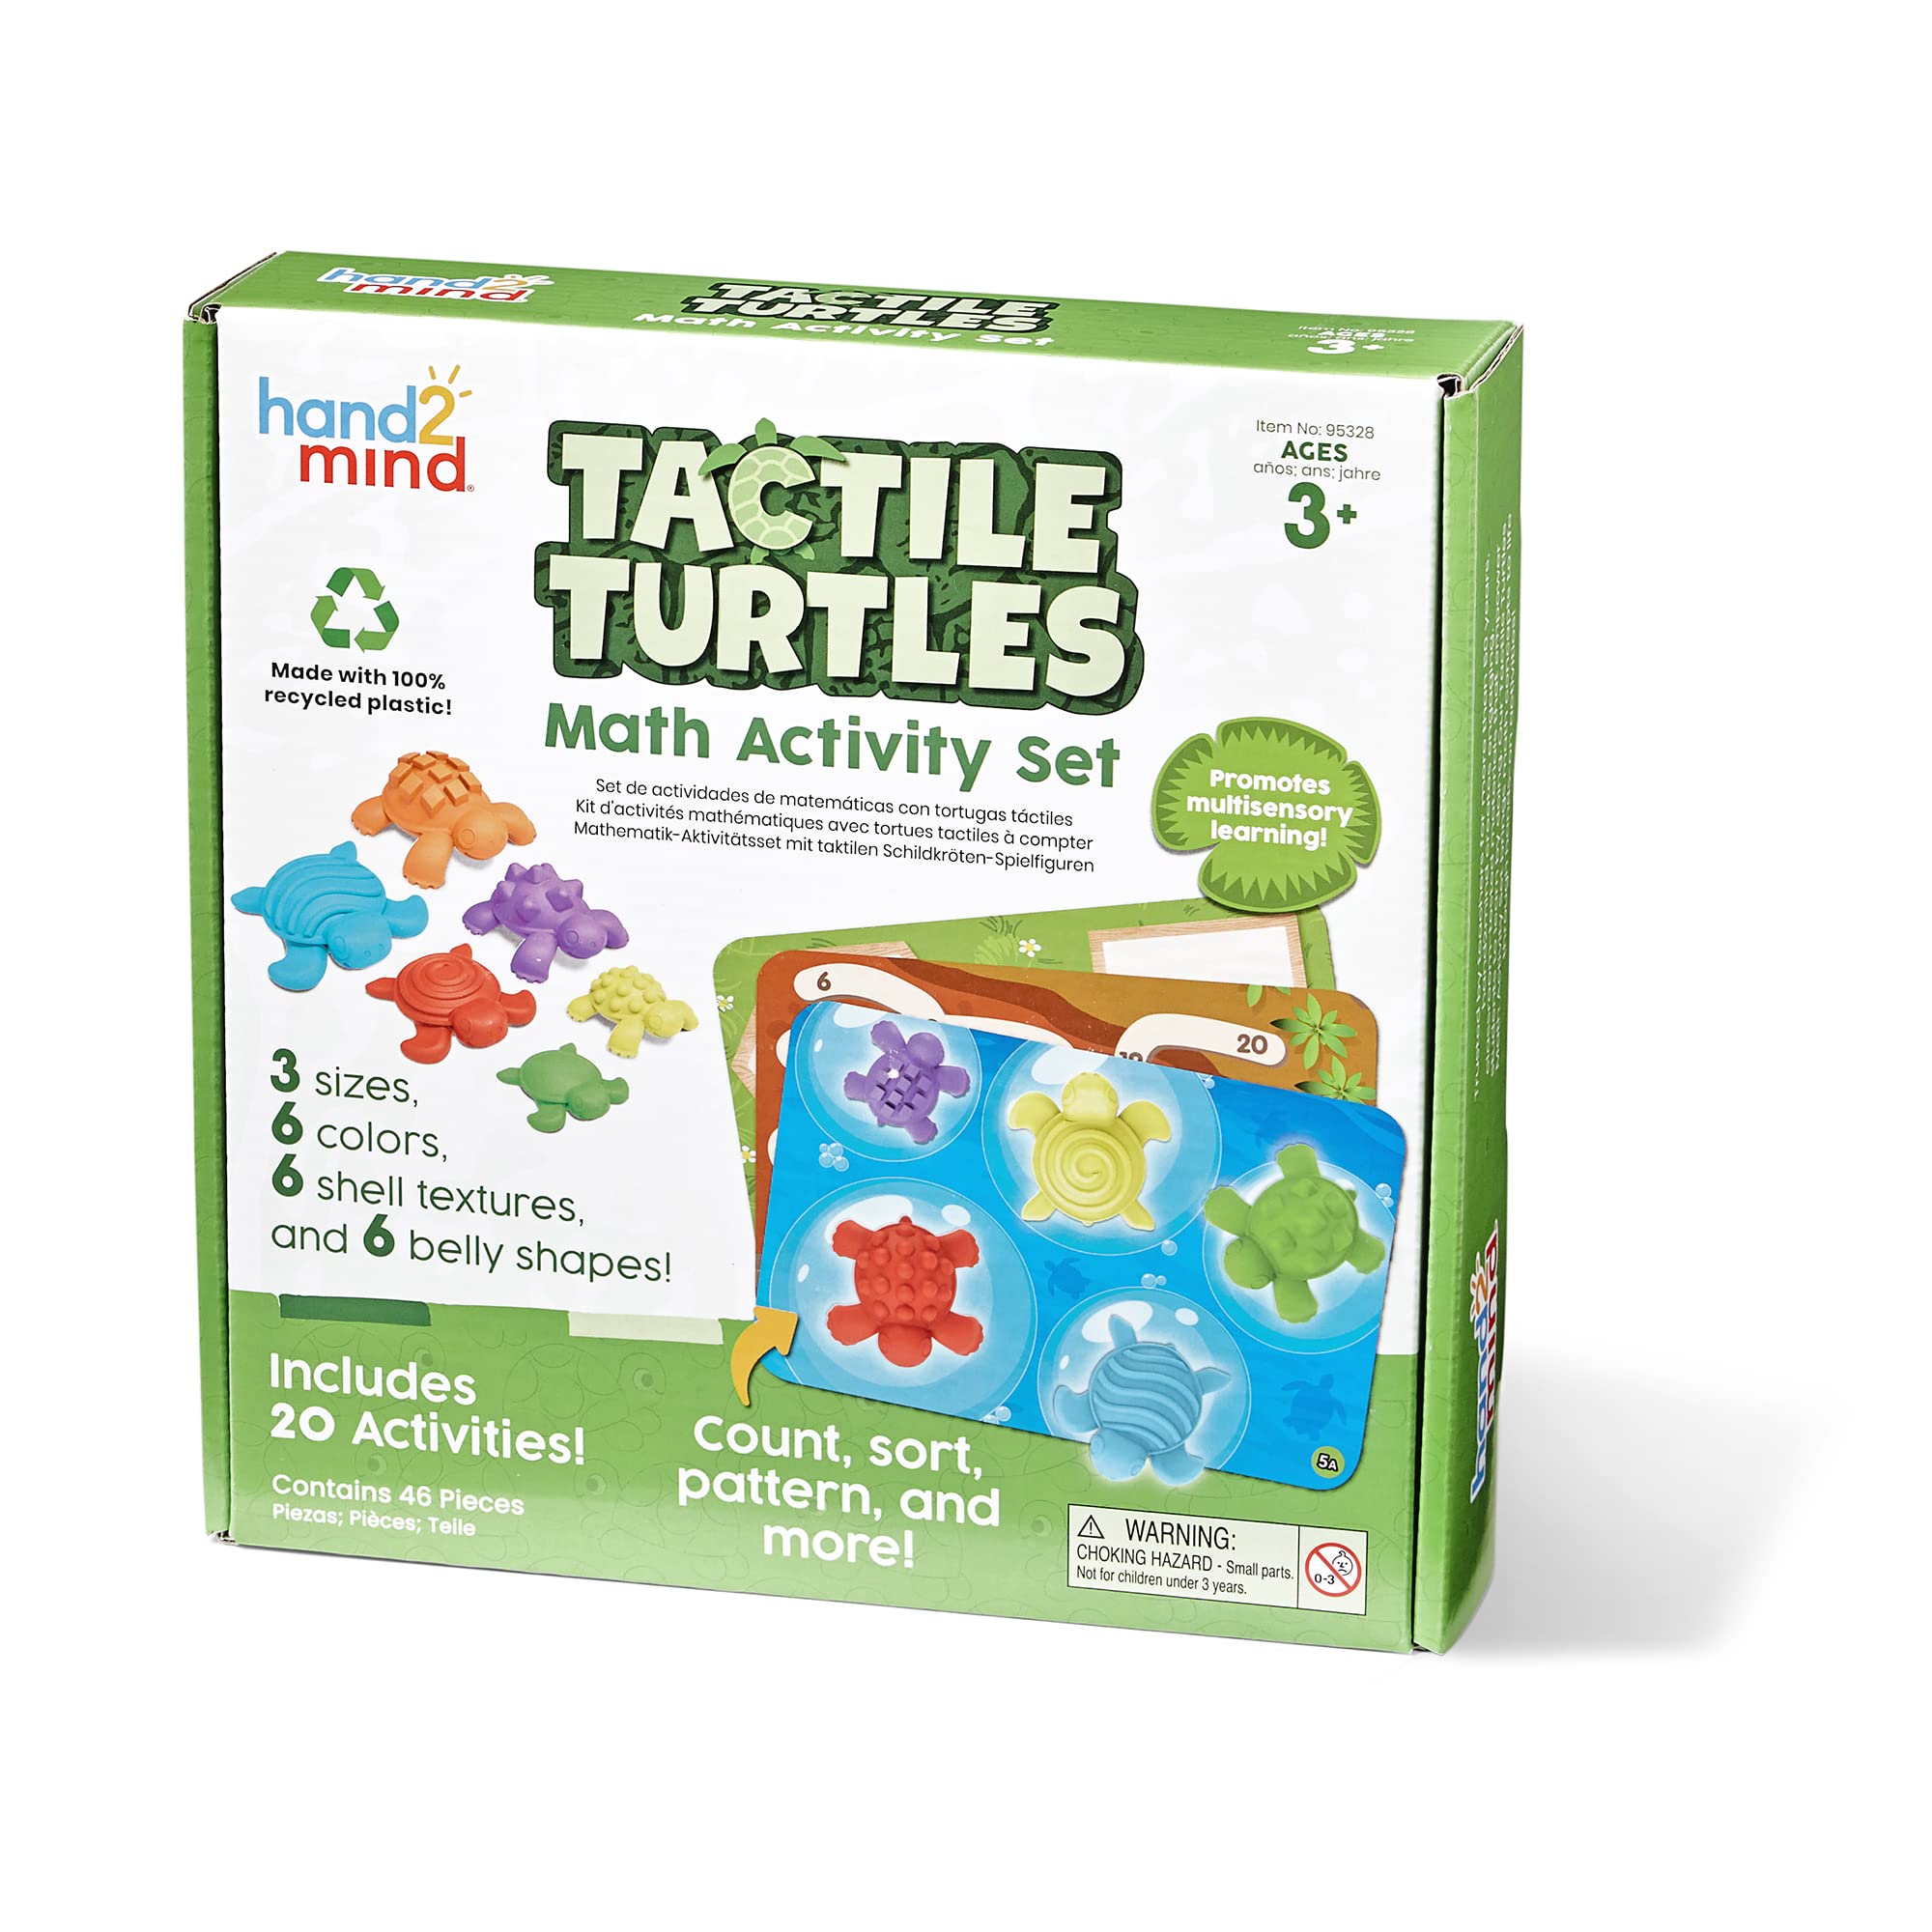 hand2mind Tactile Turtles Math Activity Set, Toddler Numbers and Counting, Math Counters for Kids, Color Sorting Toys, Sensory Turtle Game, Preschool Learning Activities, Montessori Math Materials